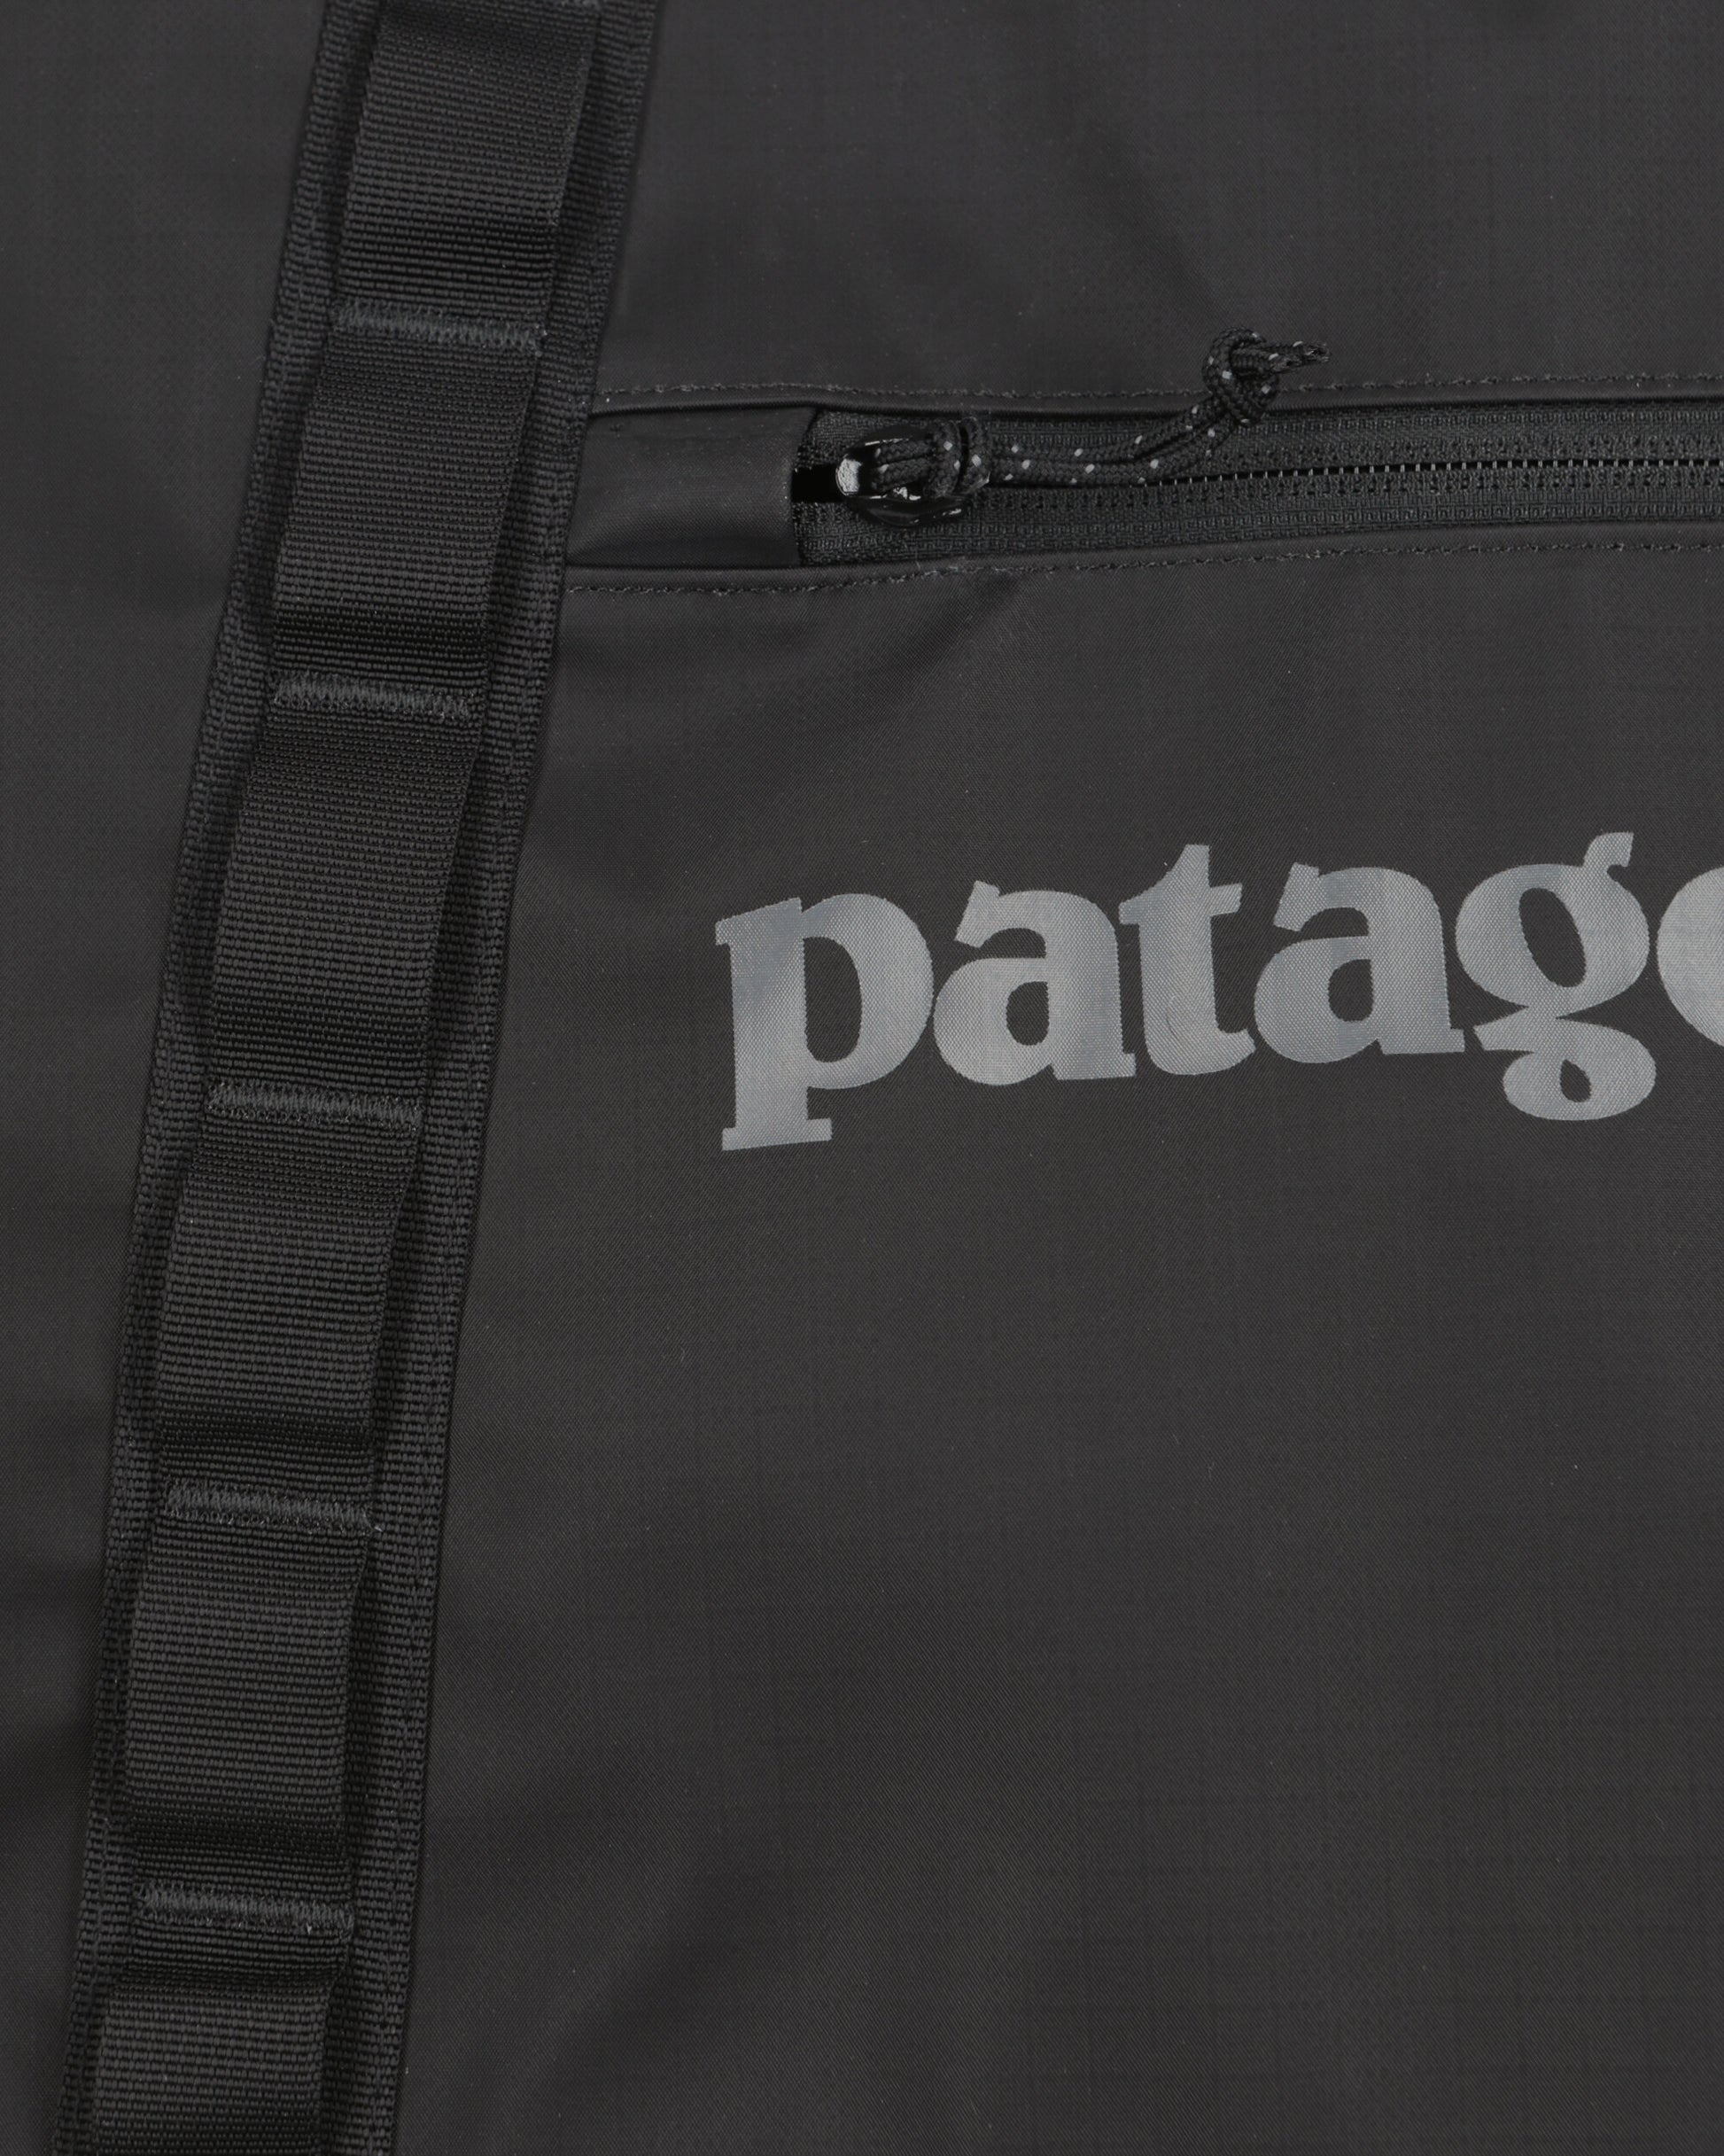 Patagonia Black Hole Gear Tote Black Bags and Backpacks Tote Bags 49276 BLK